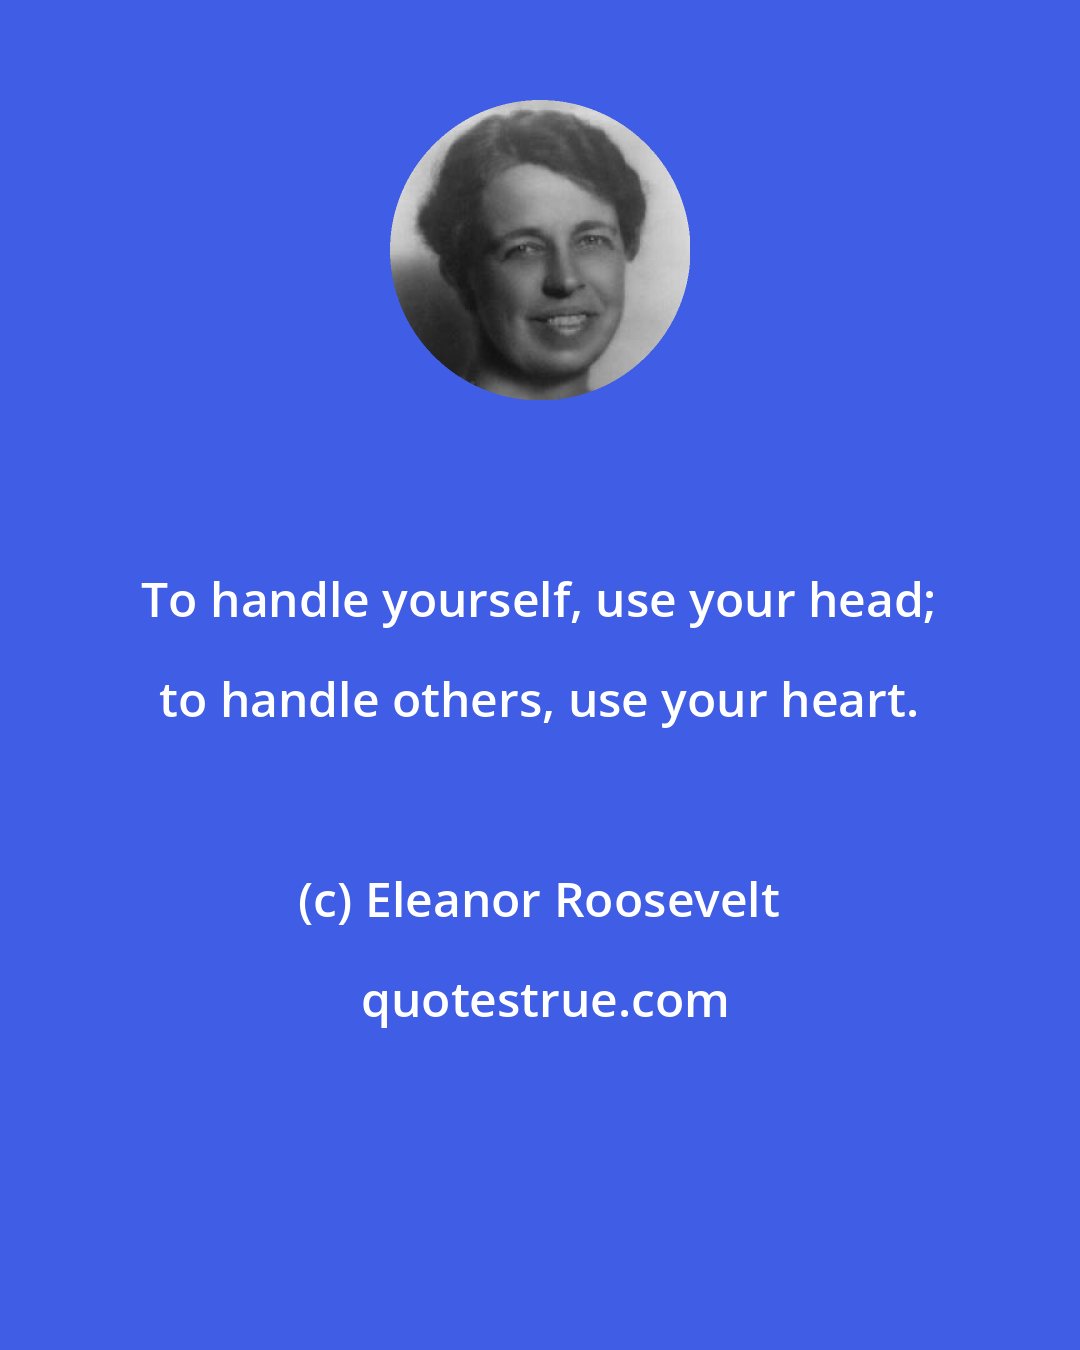 Eleanor Roosevelt: To handle yourself, use your head; to handle others, use your heart.